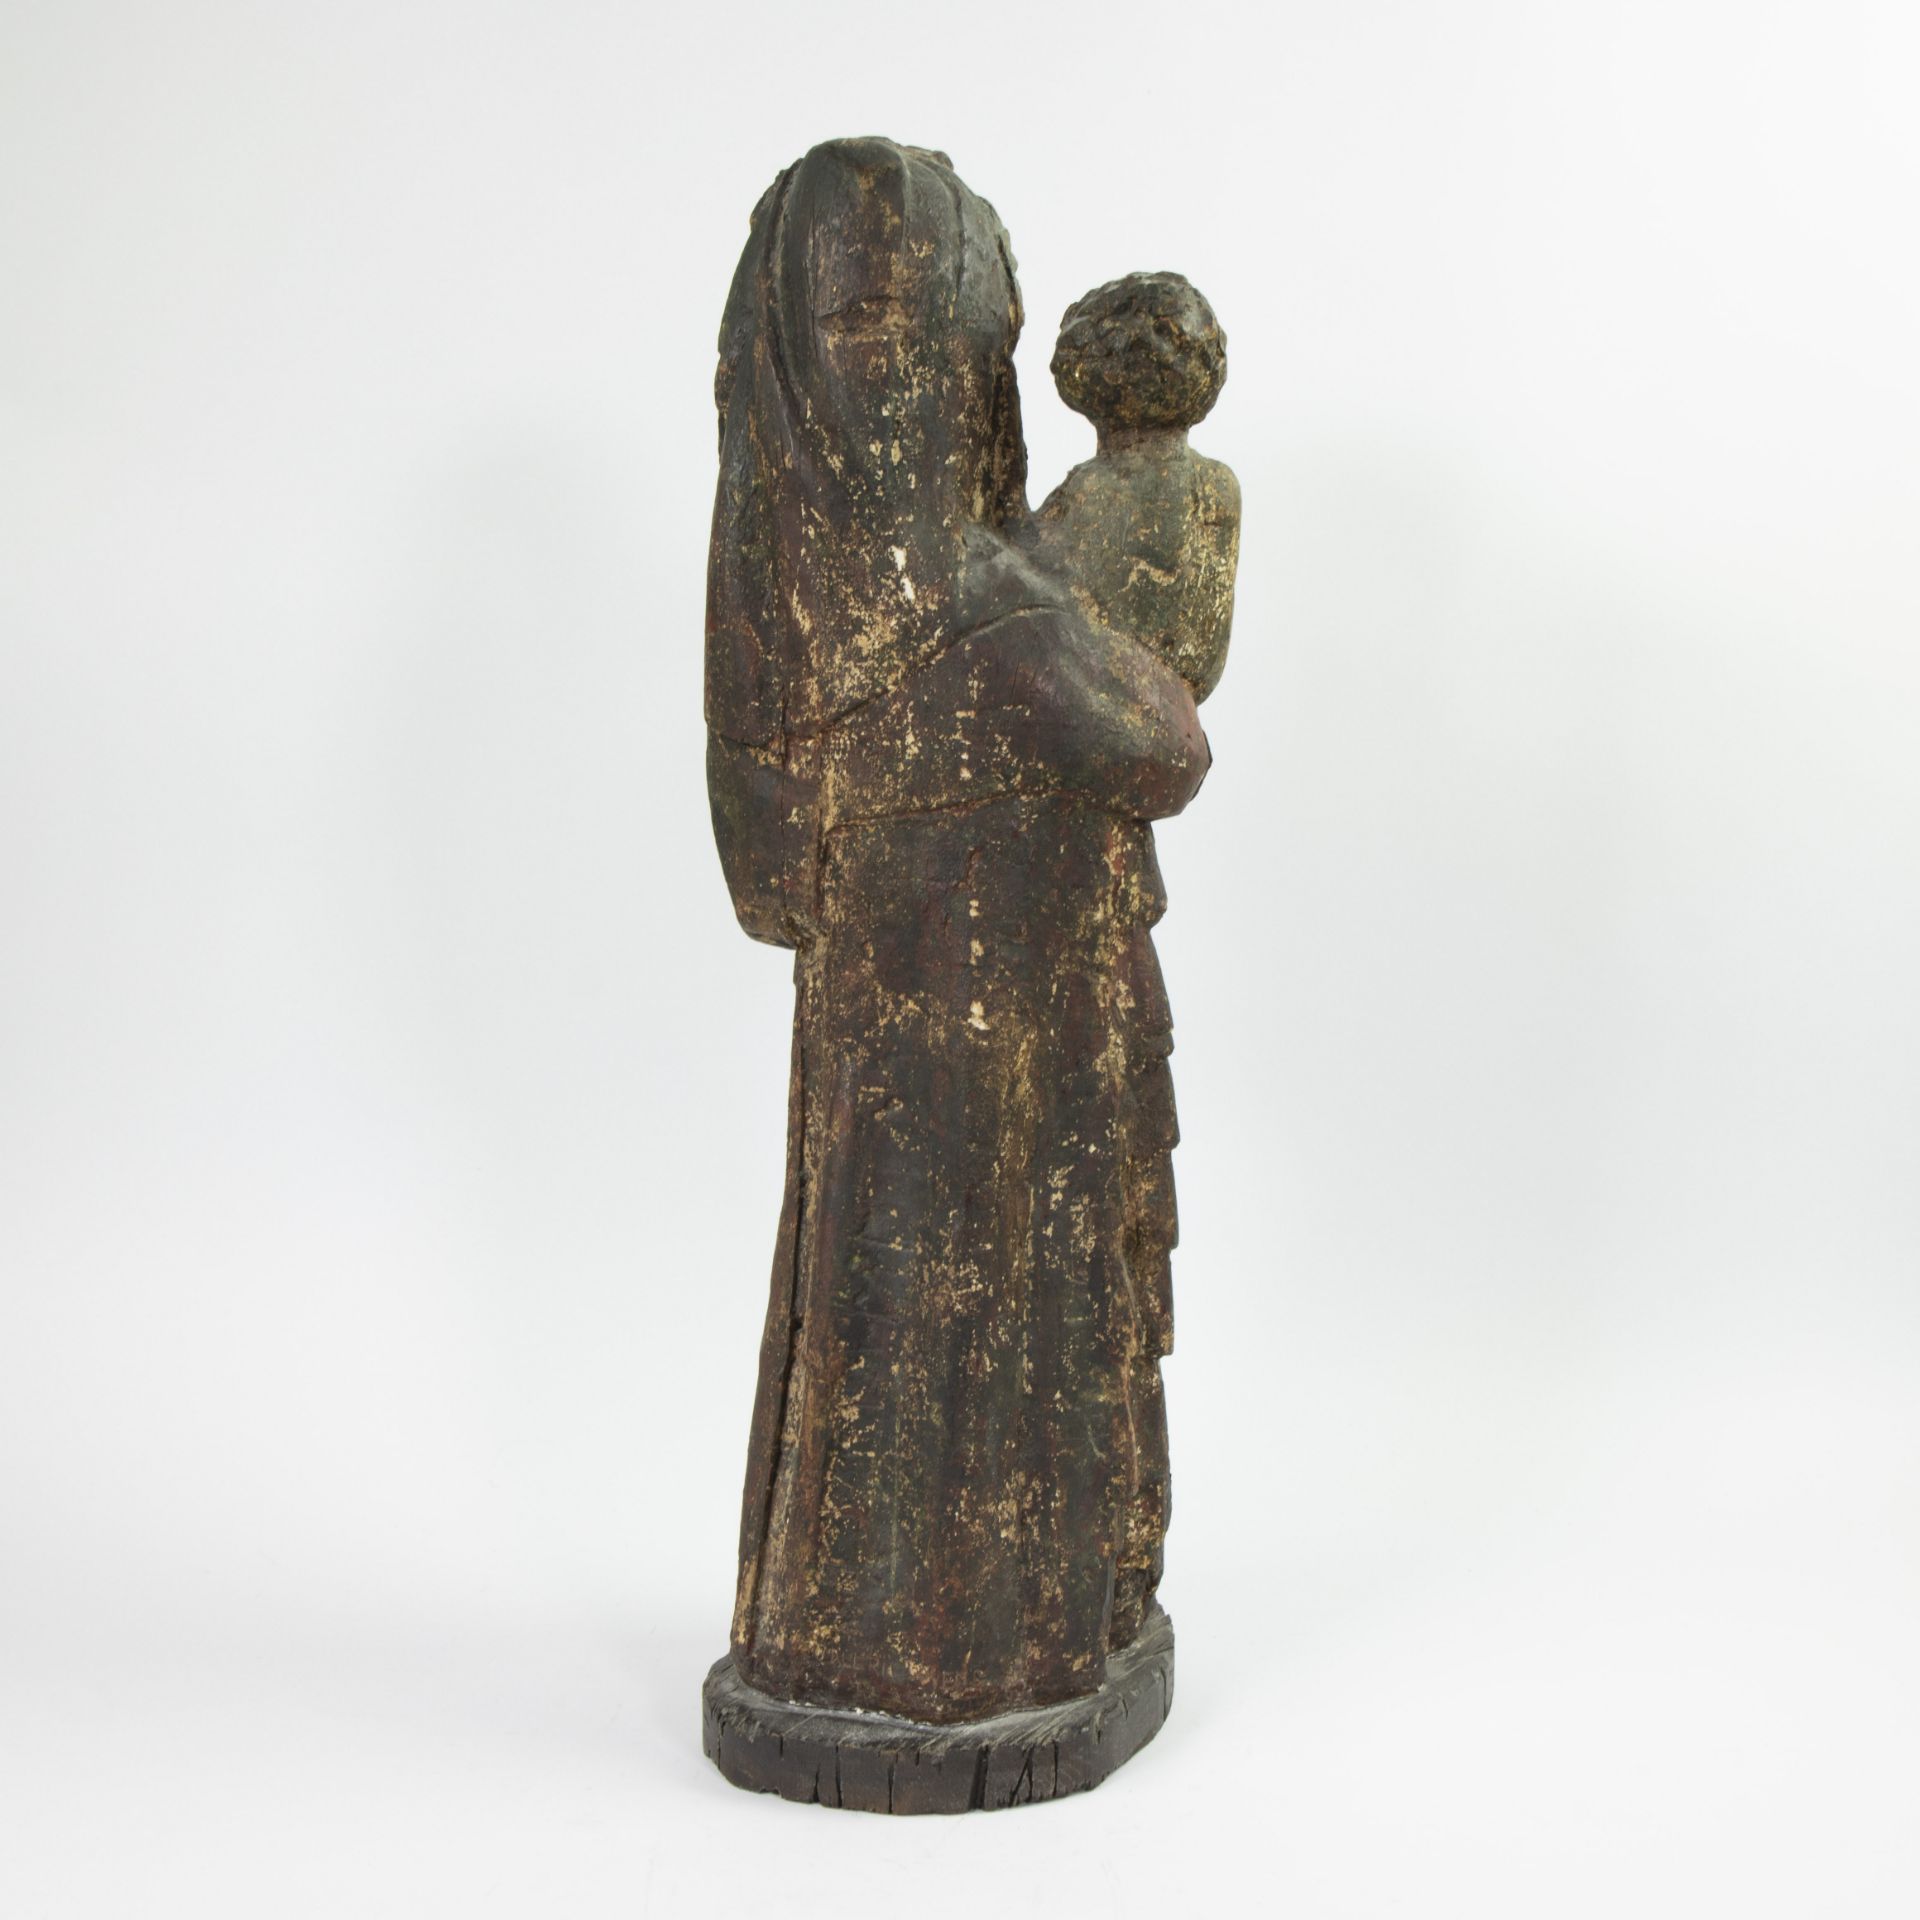 Patinated plaster of a Madonna with child Ile de France, 19th copie after example from 14th century - Image 3 of 4